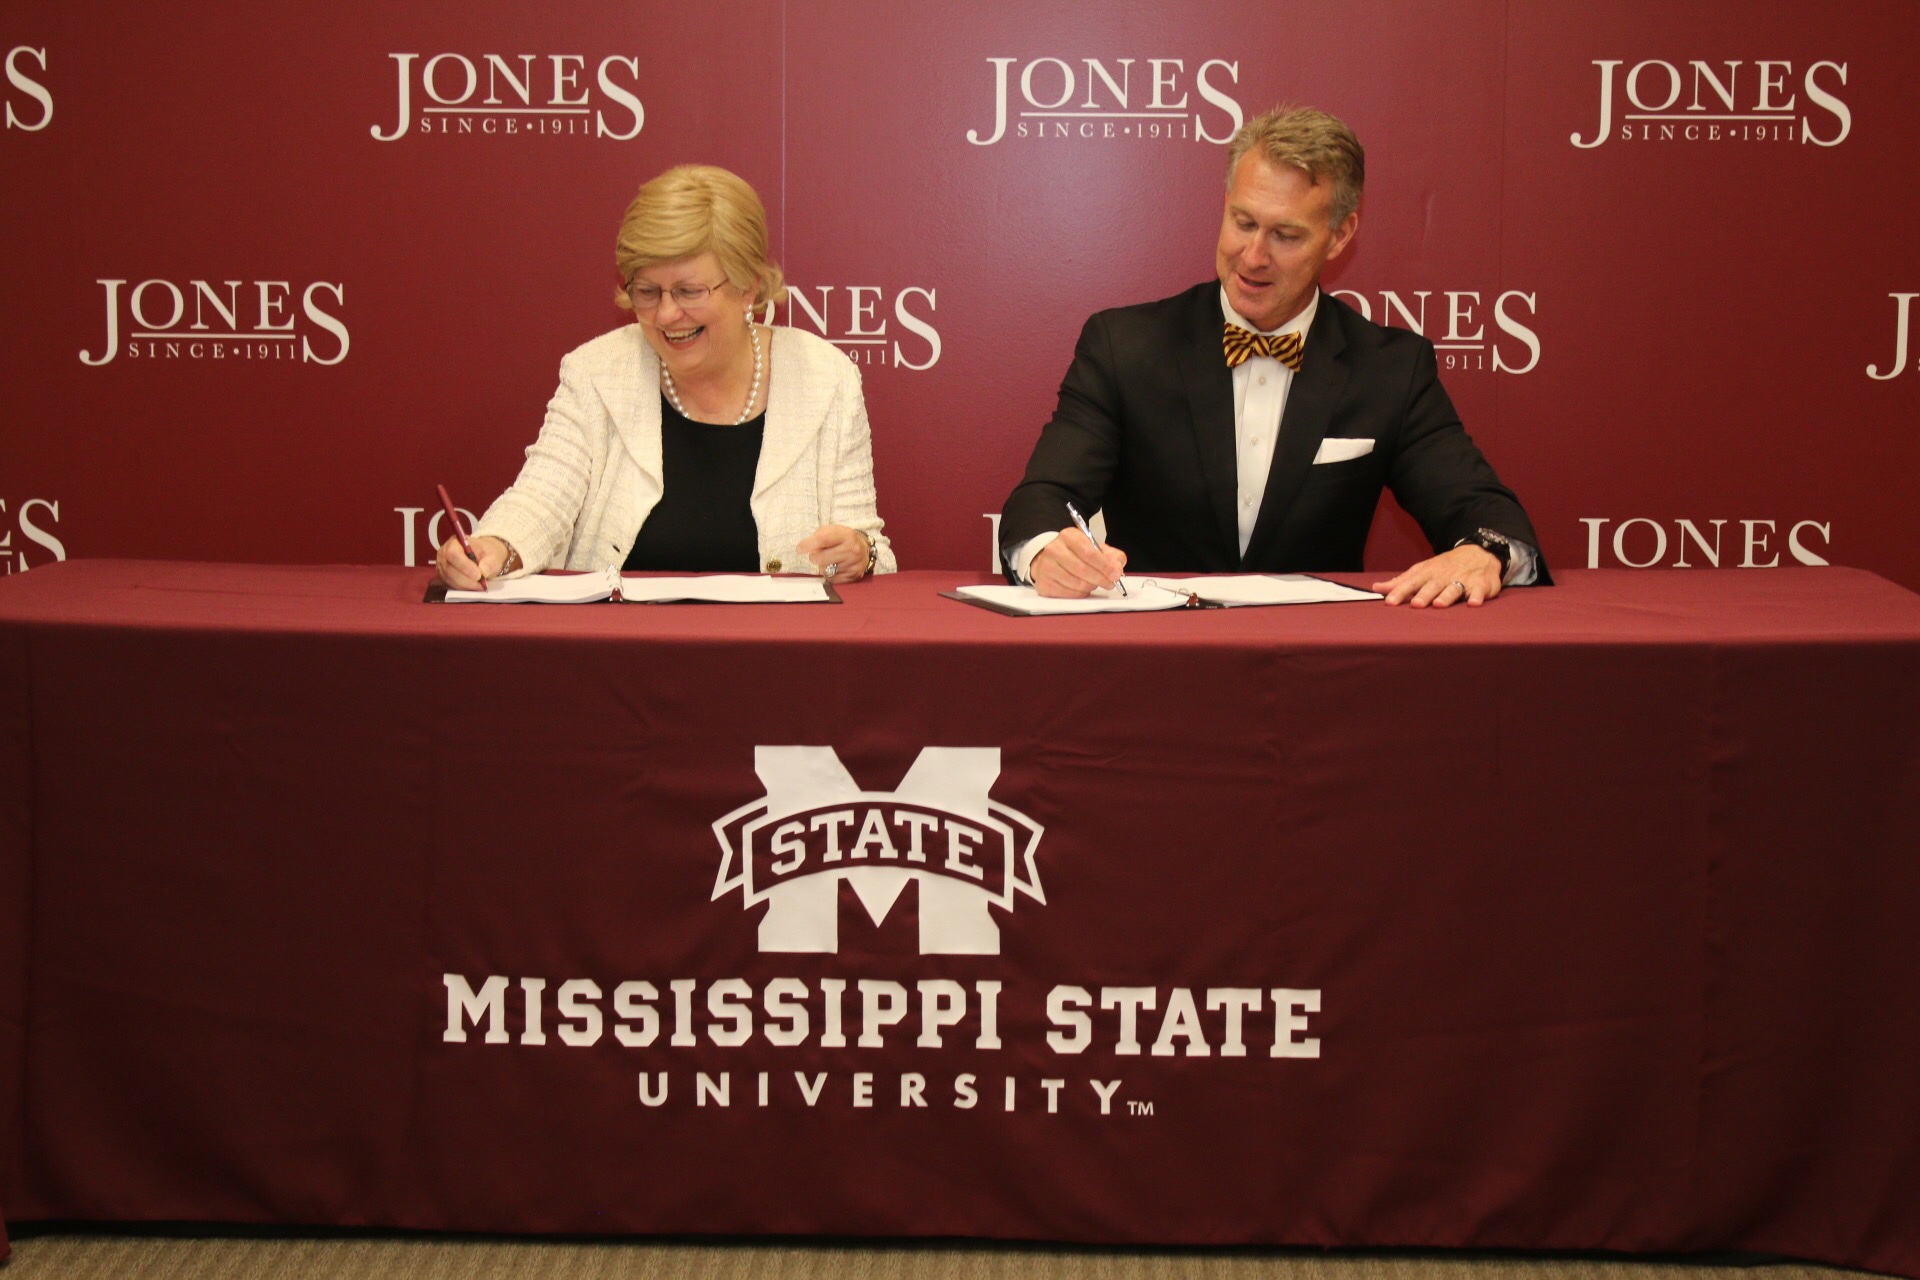 MSU PHOTO ID: Mississippi State University Provost and Executive Vice President Judy Bonner, left, and Jones County Junior College President Jesse Smith sign a Partnership Pathways agreement that will make it easier for students to complete baccalaureate programs. (Photo by Lisa Sollie)